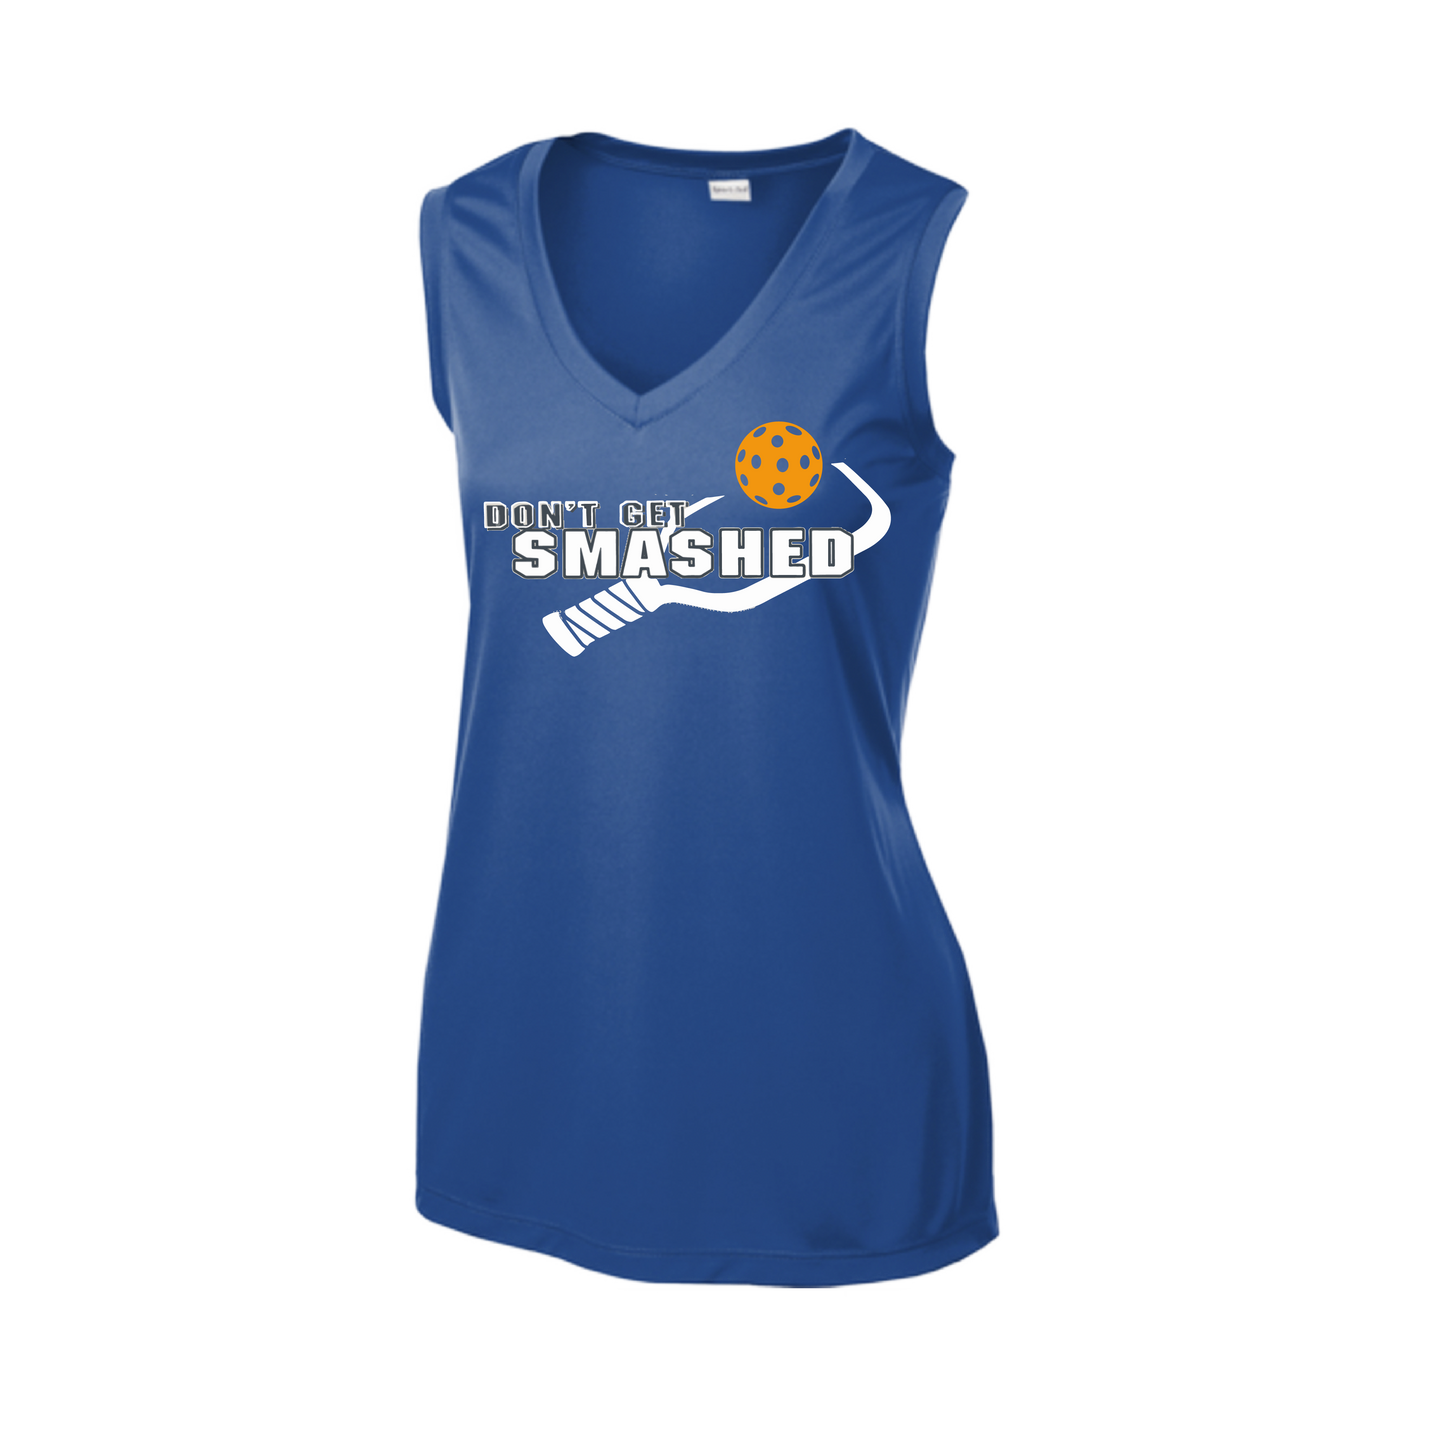 These pickleball sleeveless shirts are lightweight, roomy and airy. They are created with PosiCharge technology for enhanced color retention, effectively wicking away moisture for maximum athletic performance.